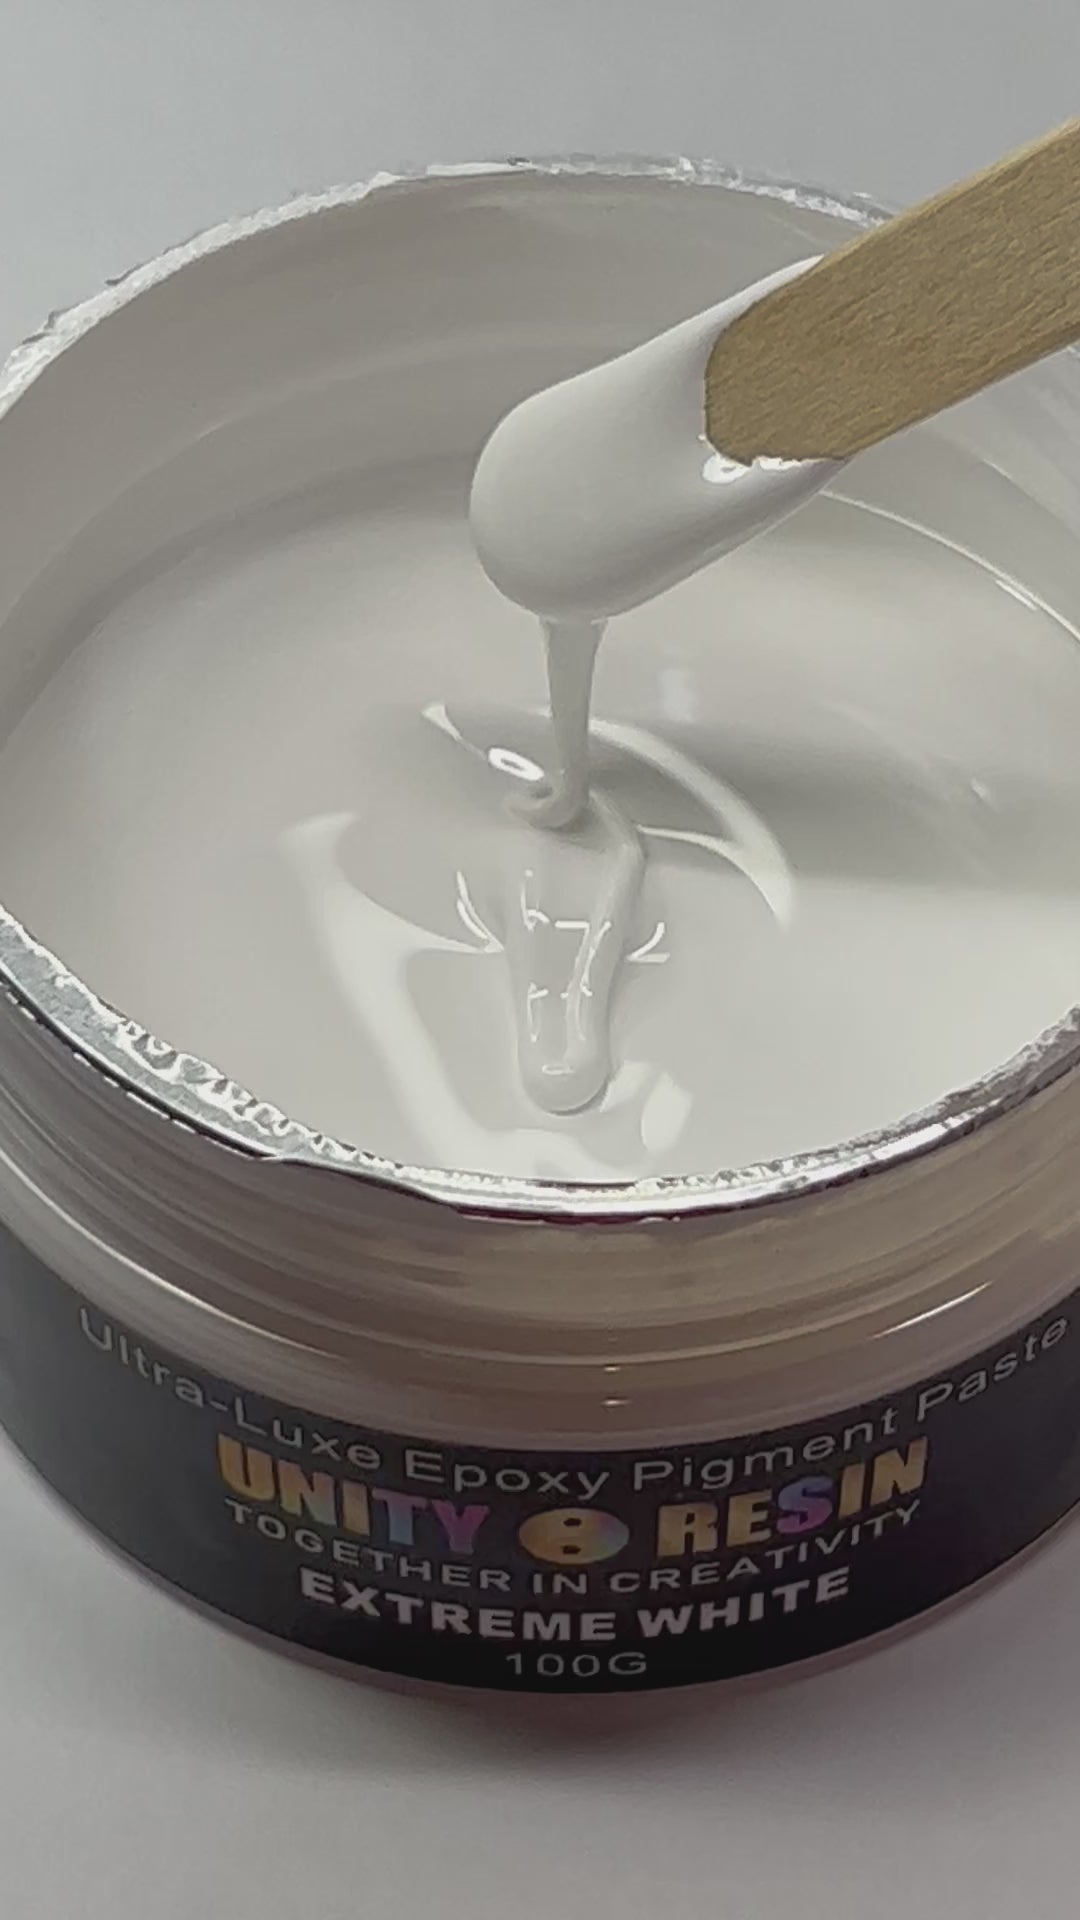 Epoxy Resin Color Pigment, Ultra White Super Colors Pigment, Professional Highly Concentrated Pure Epoxy Pigment, Use with Mica Powder for Epoxy